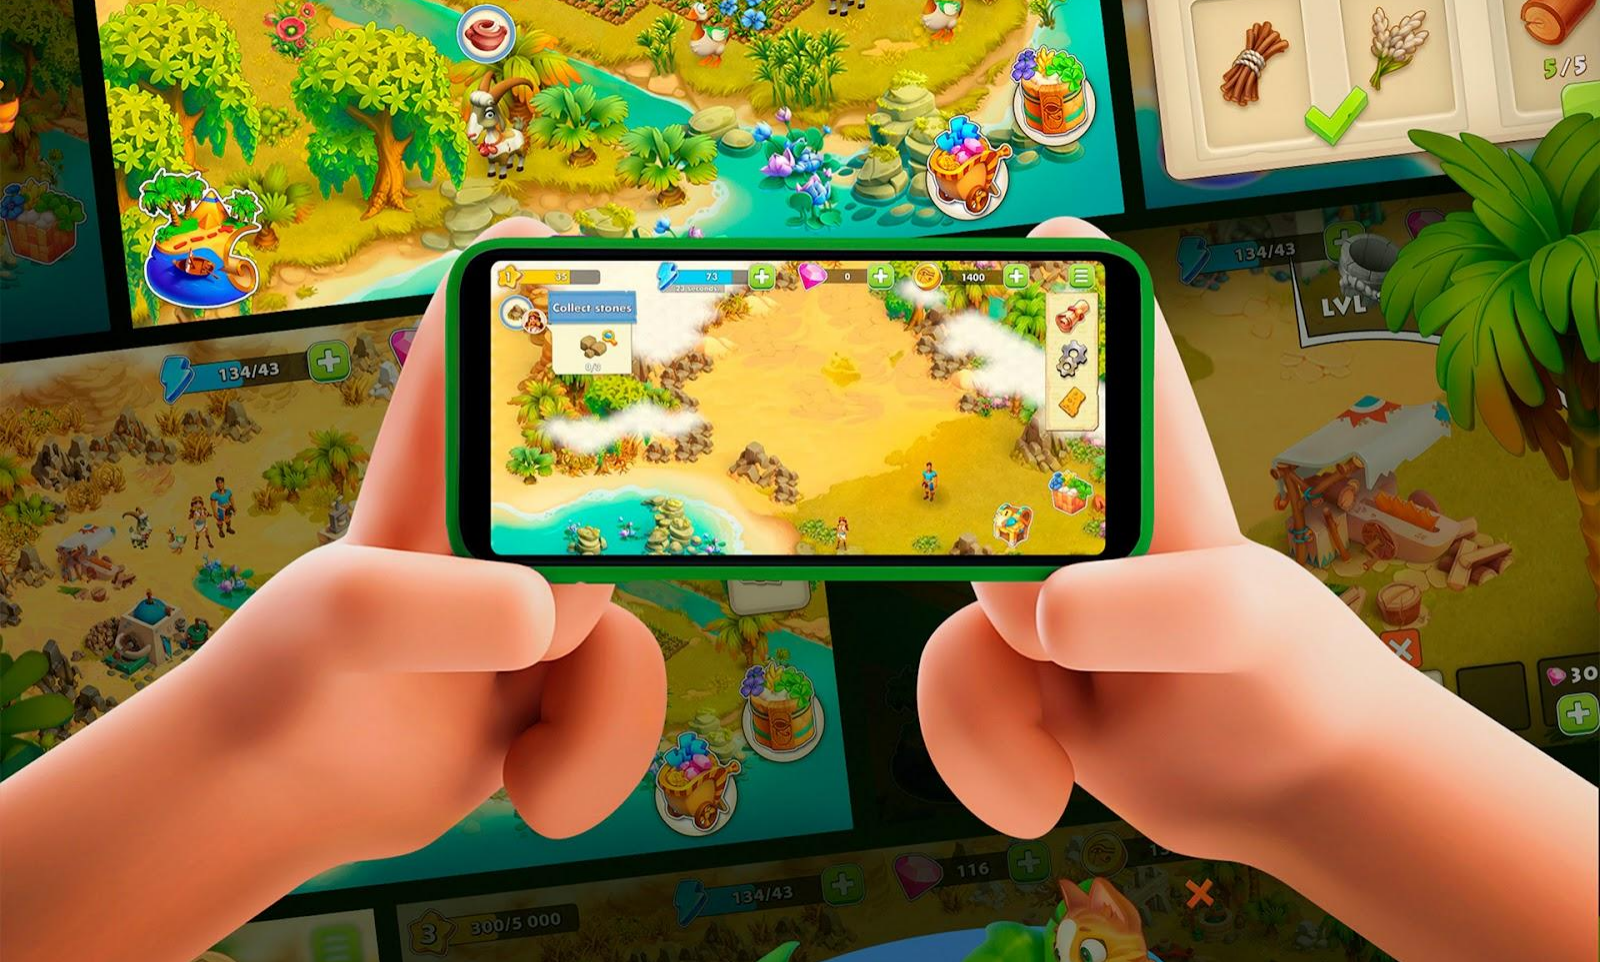 Choosing the perfect genre for your mobile game: what's popular and profitable